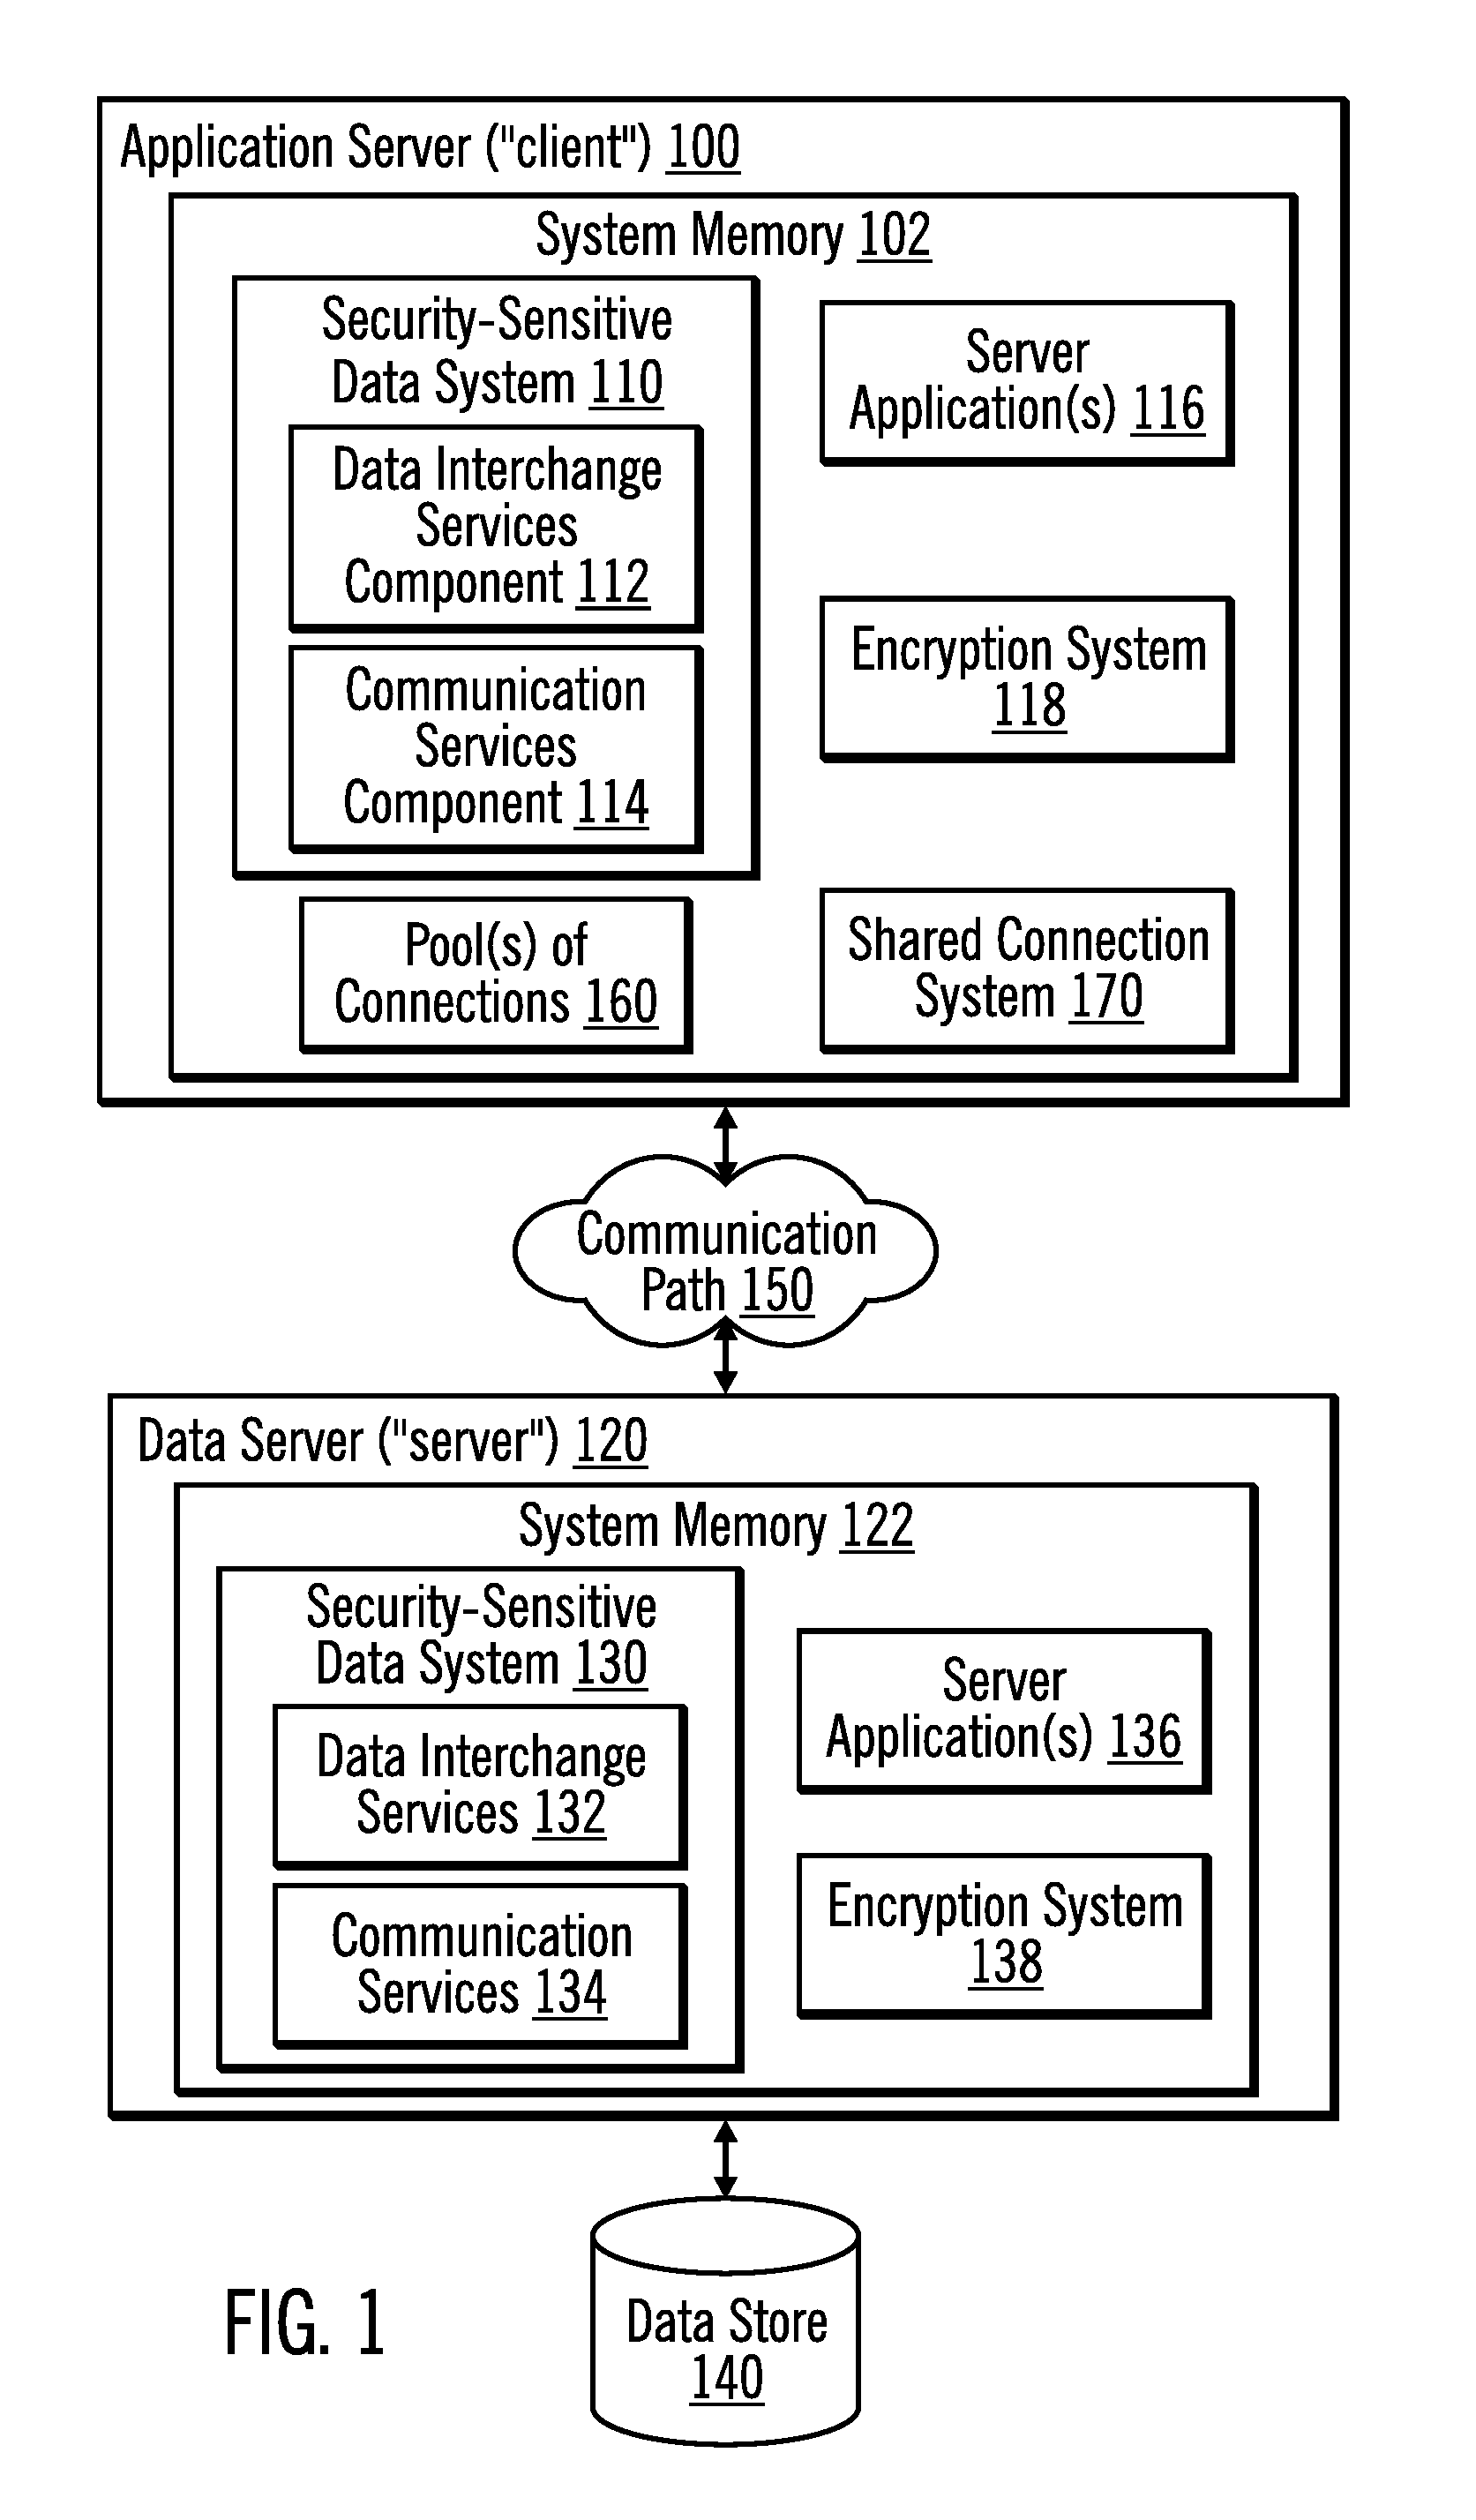 Encryption of security-sensitive data by re-using a connection